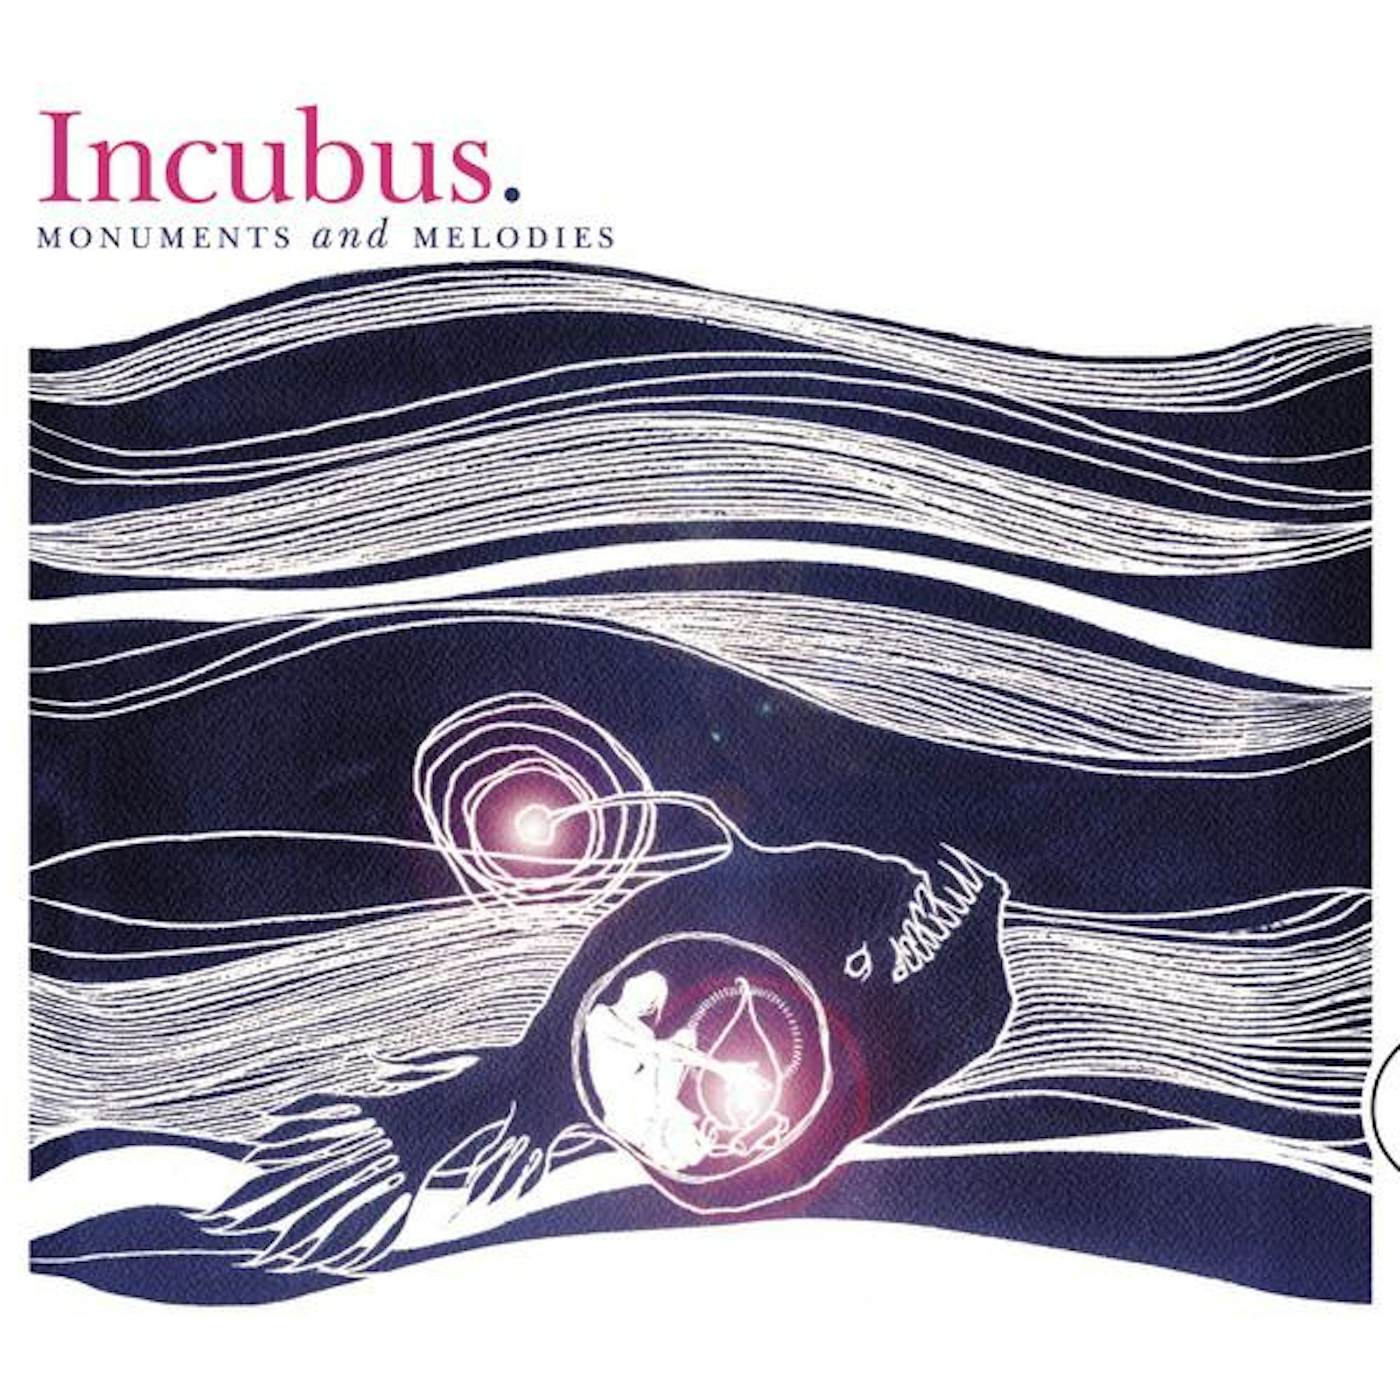 Incubus MONUMENTS AND MELODIES CD